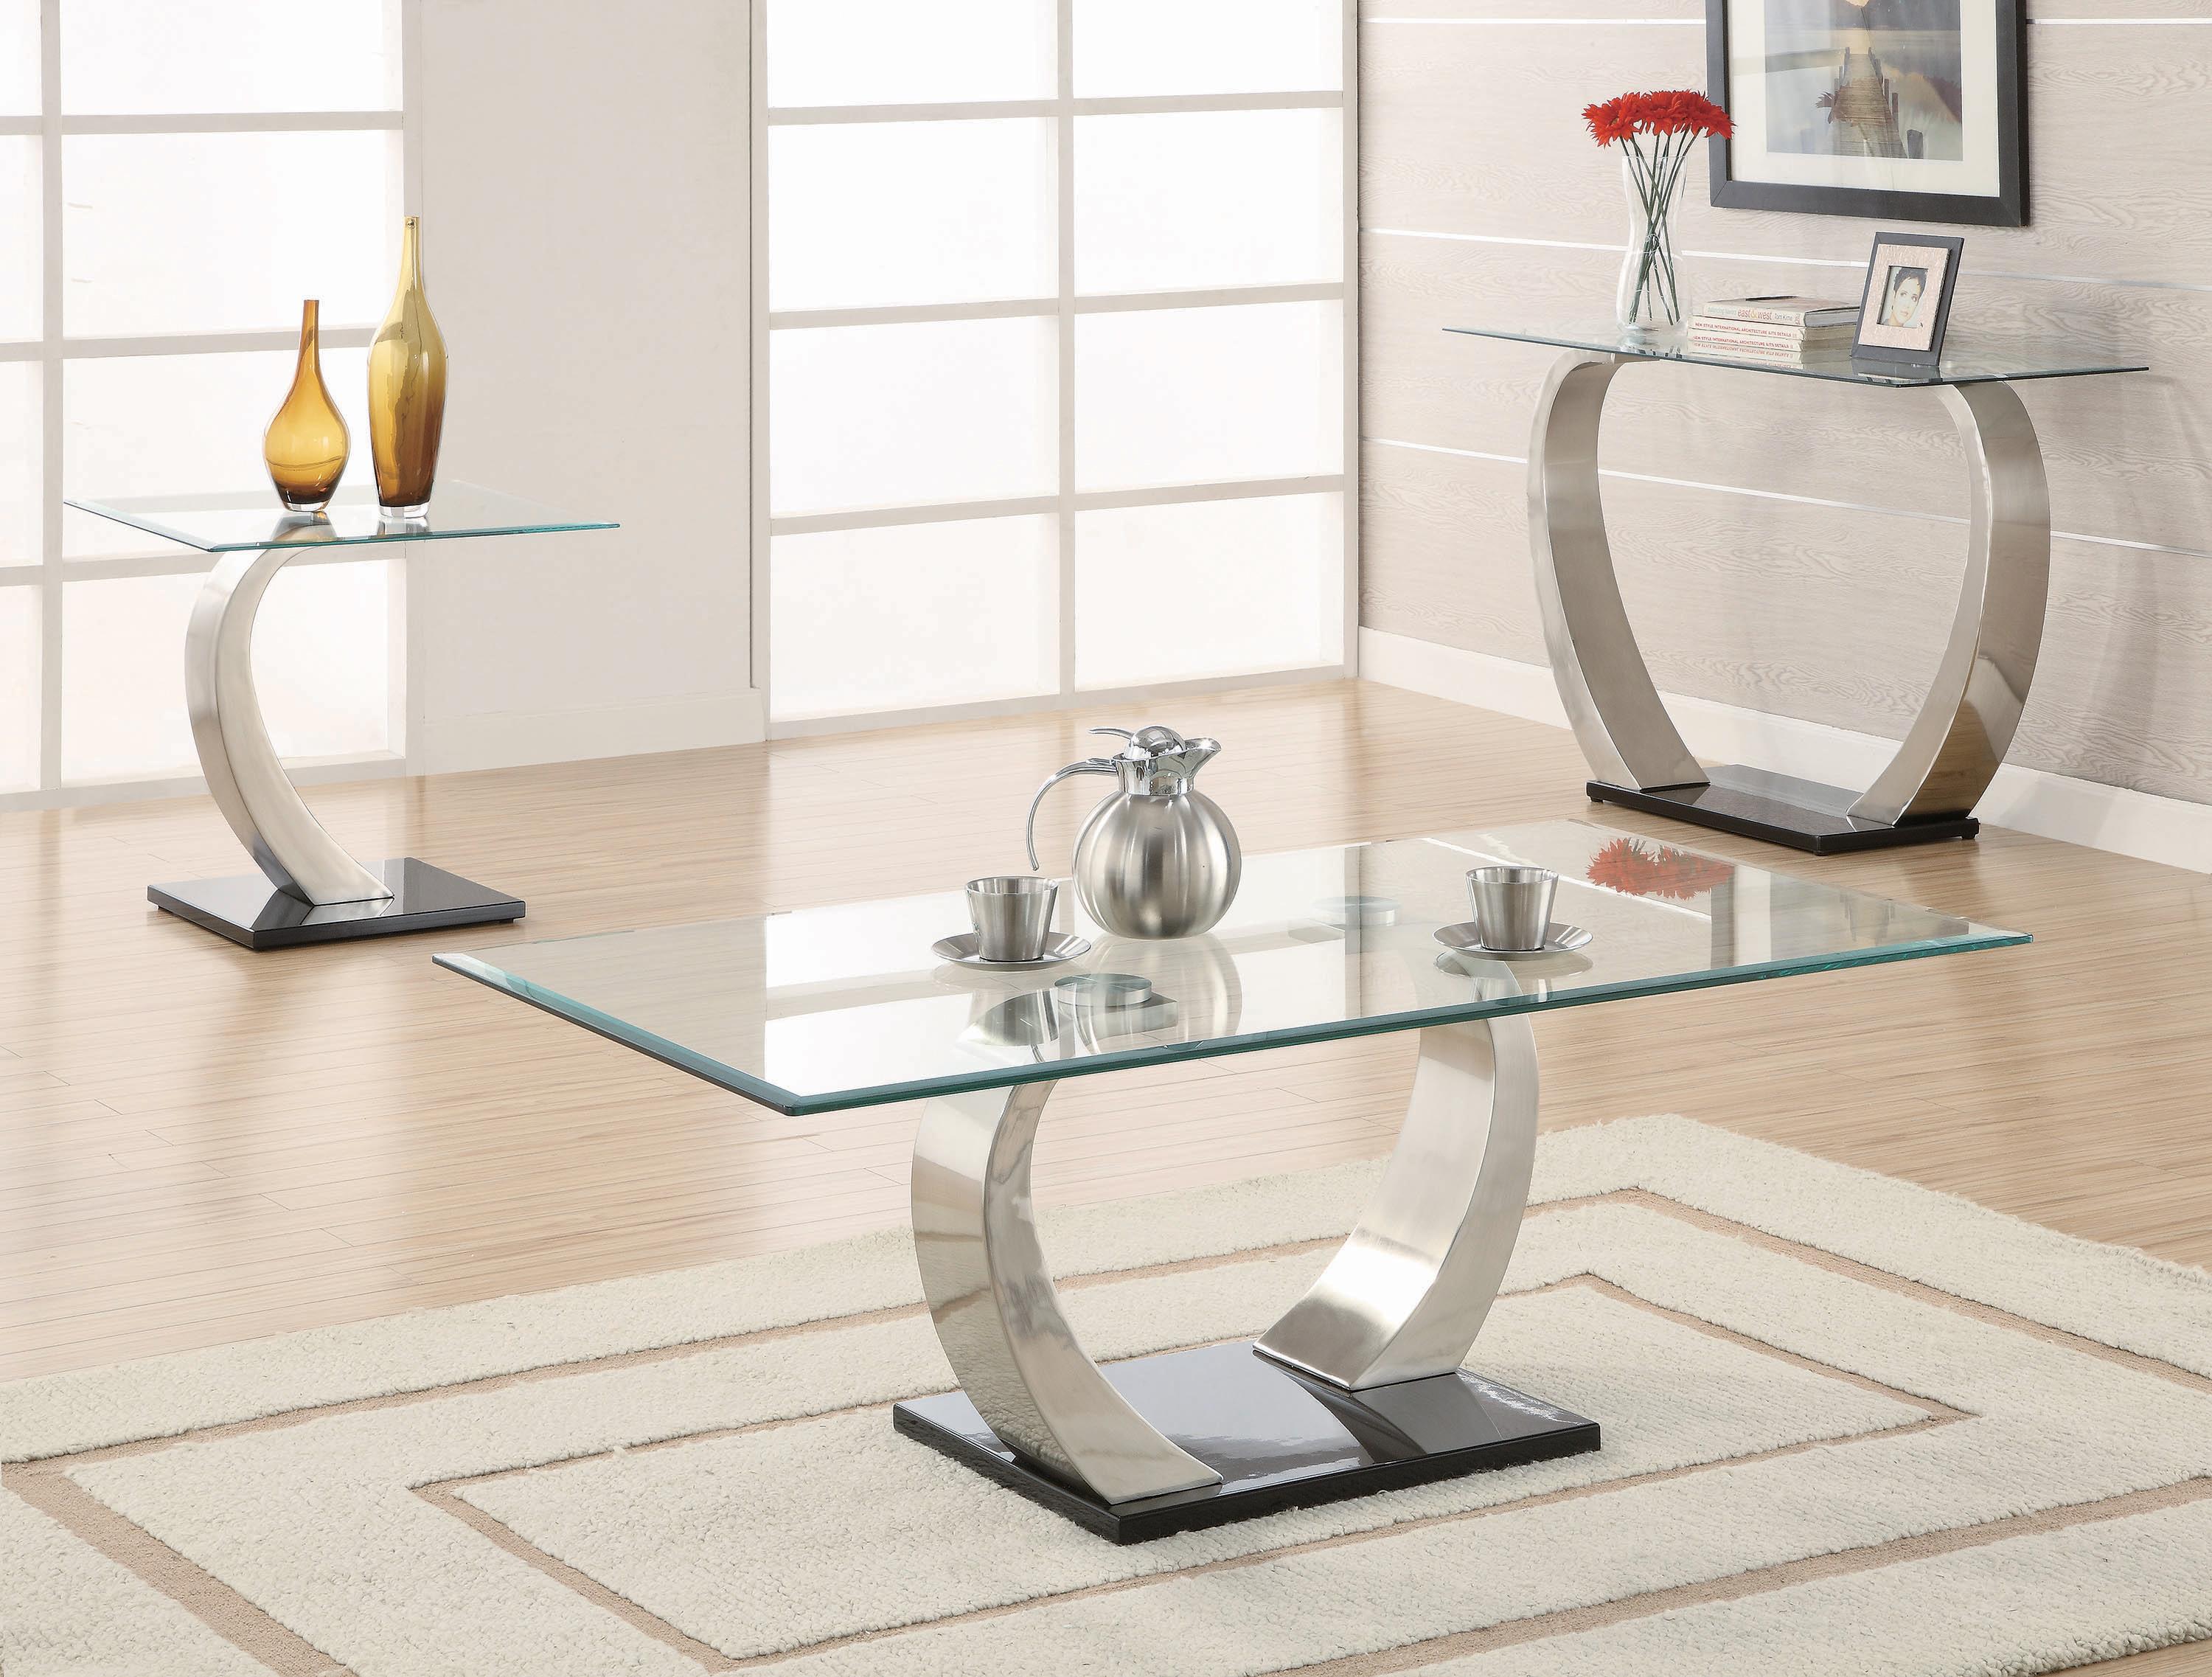 Contemporary Coffee Table Set 701238-S3 701238-S3 in Chrome 